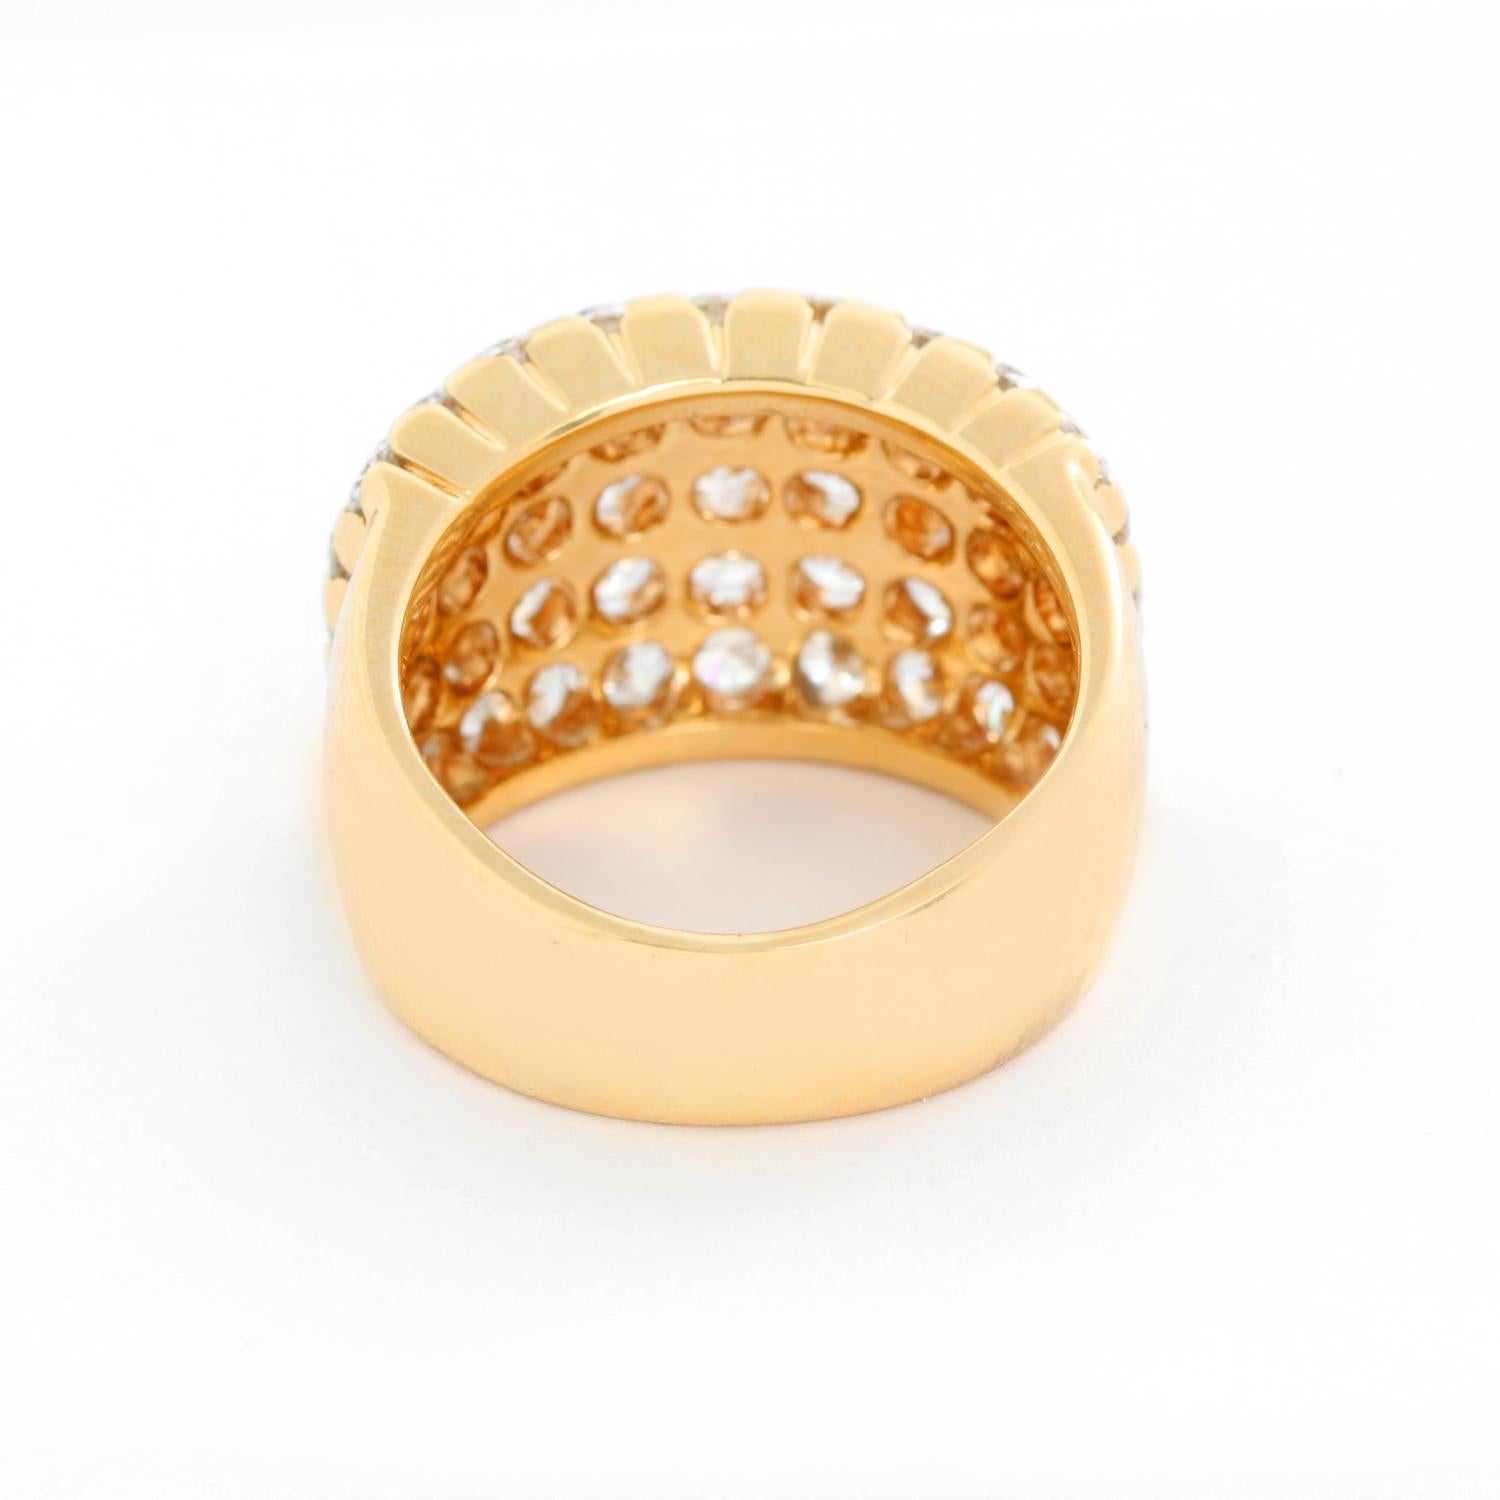 Round Cut Beautiful 18K Yellow Gold and Diamond Dome Ring Size 7 1/4 For Sale